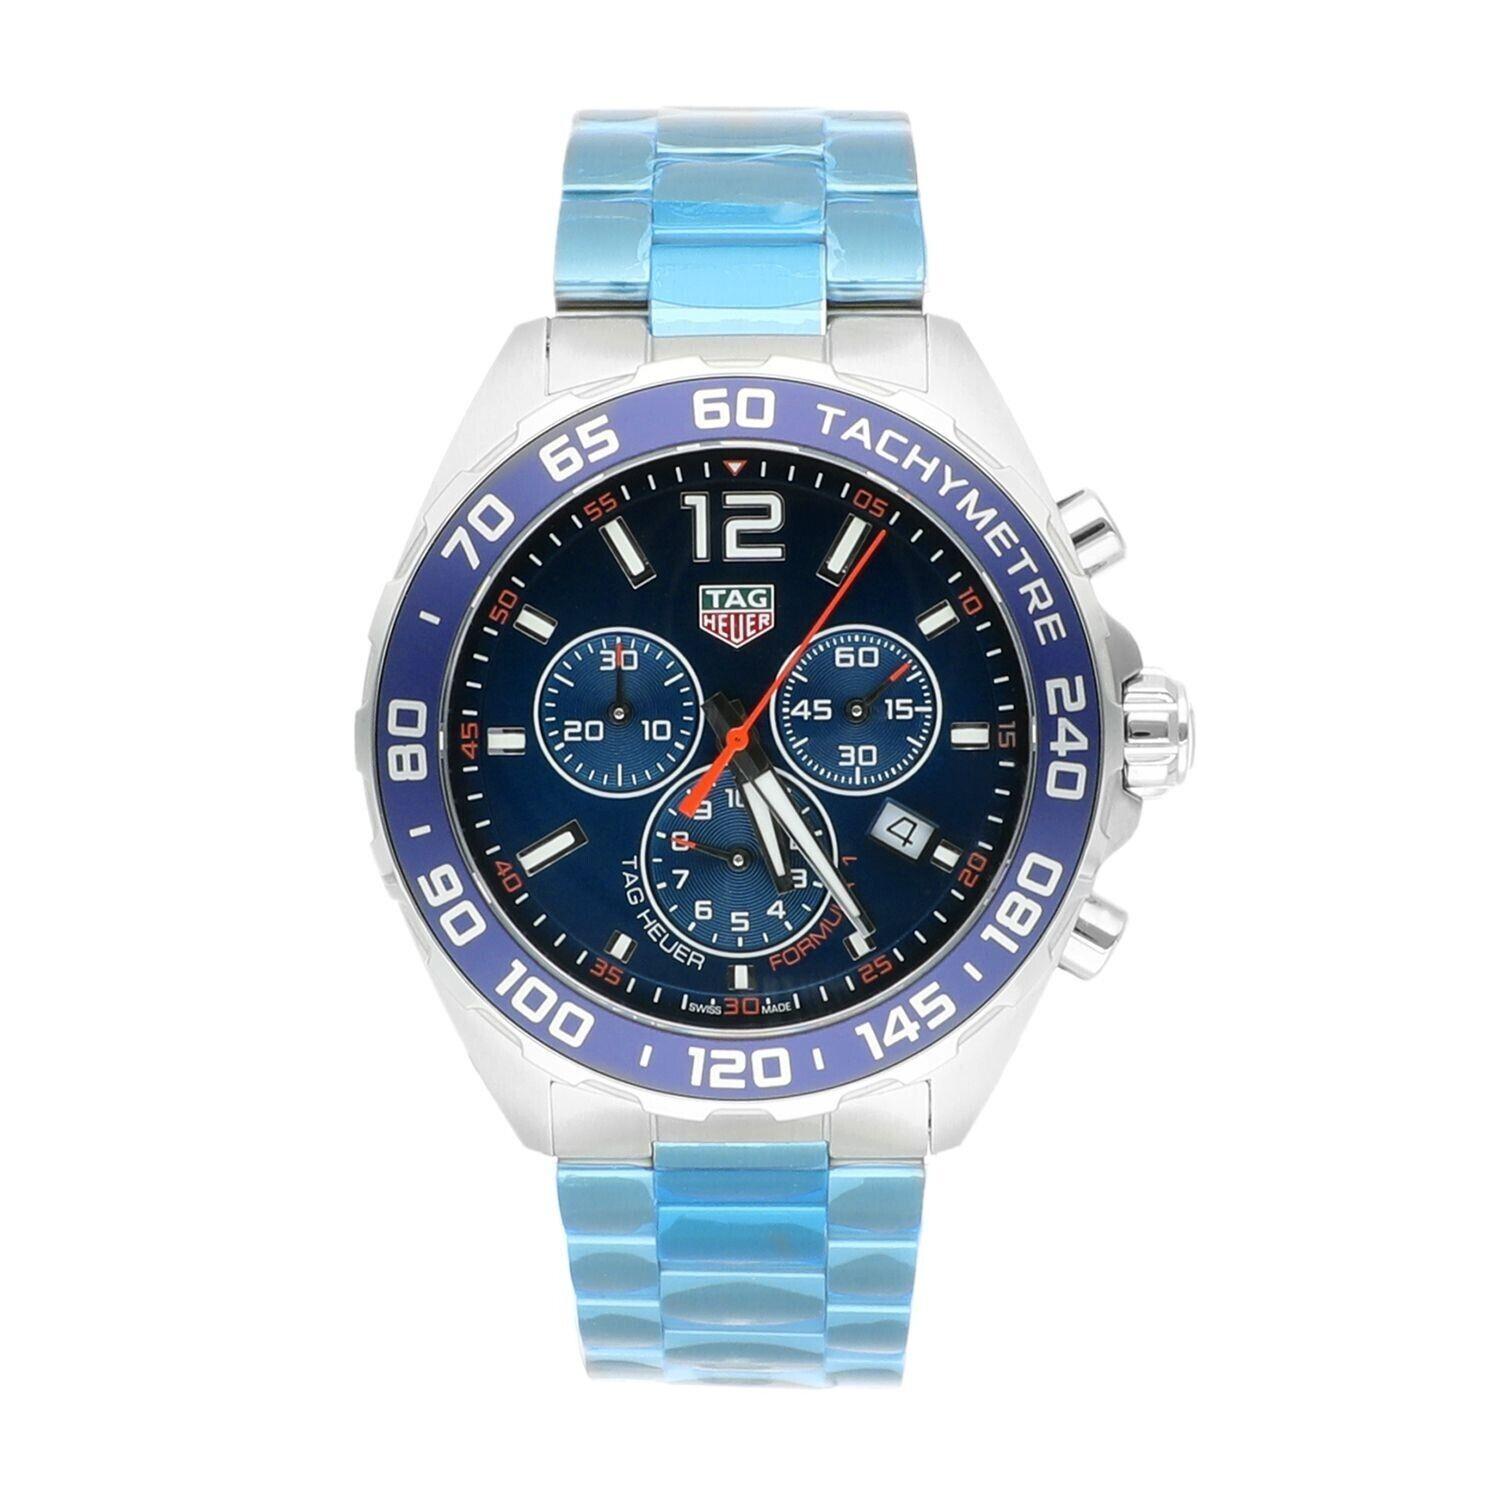 Tag Heuer Formula 1 Chronograph Blue Dial Men's Watch CAZ1014.BA0842, Complete. 
A versatile quartz chronograph with blue dial and tachymeter scale inspired by the world’s most prestigious motor-sports circuit. High-resistance materials are used